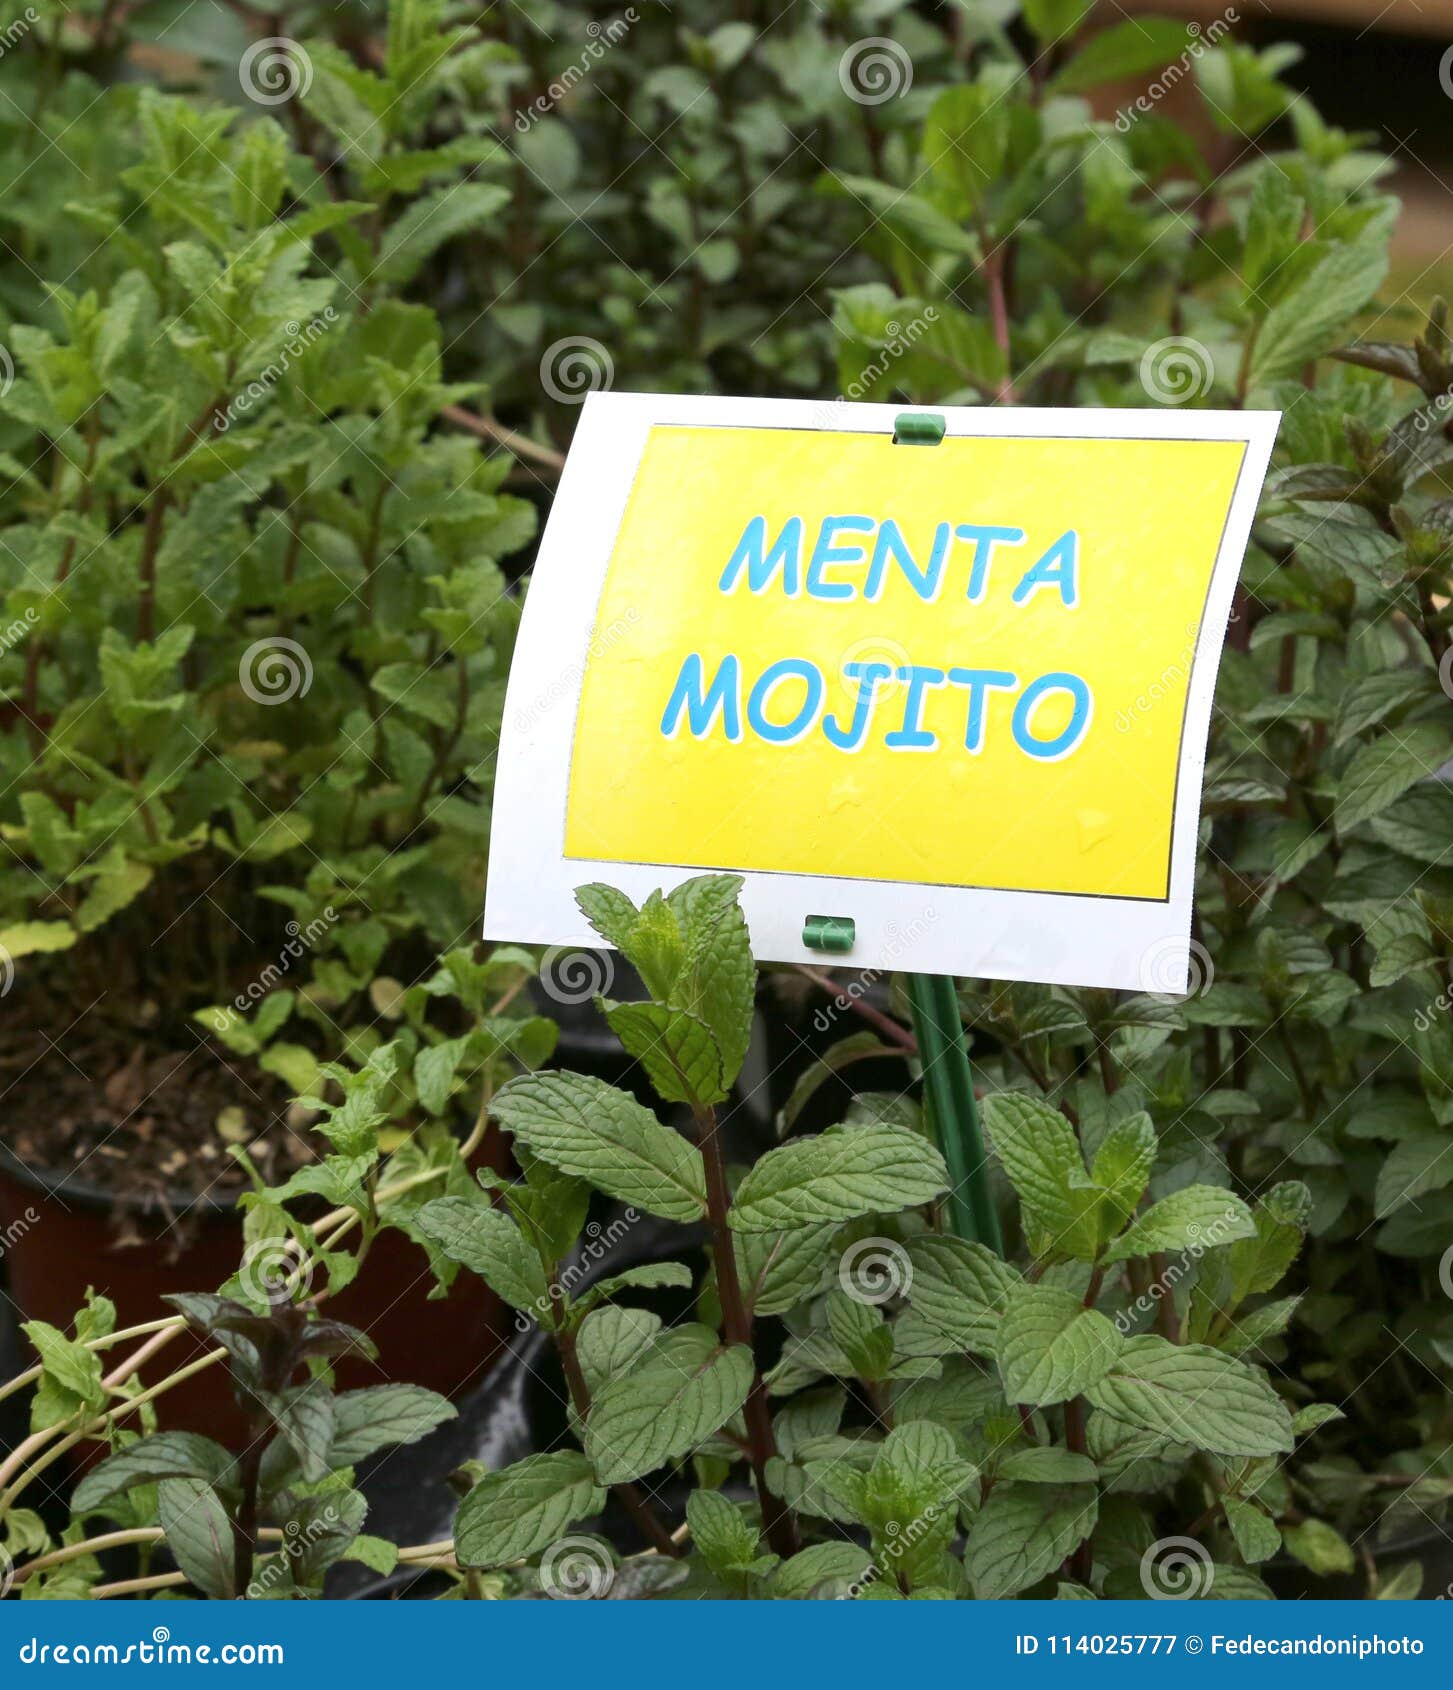 text menta mojit which in italian means mentha to prepare